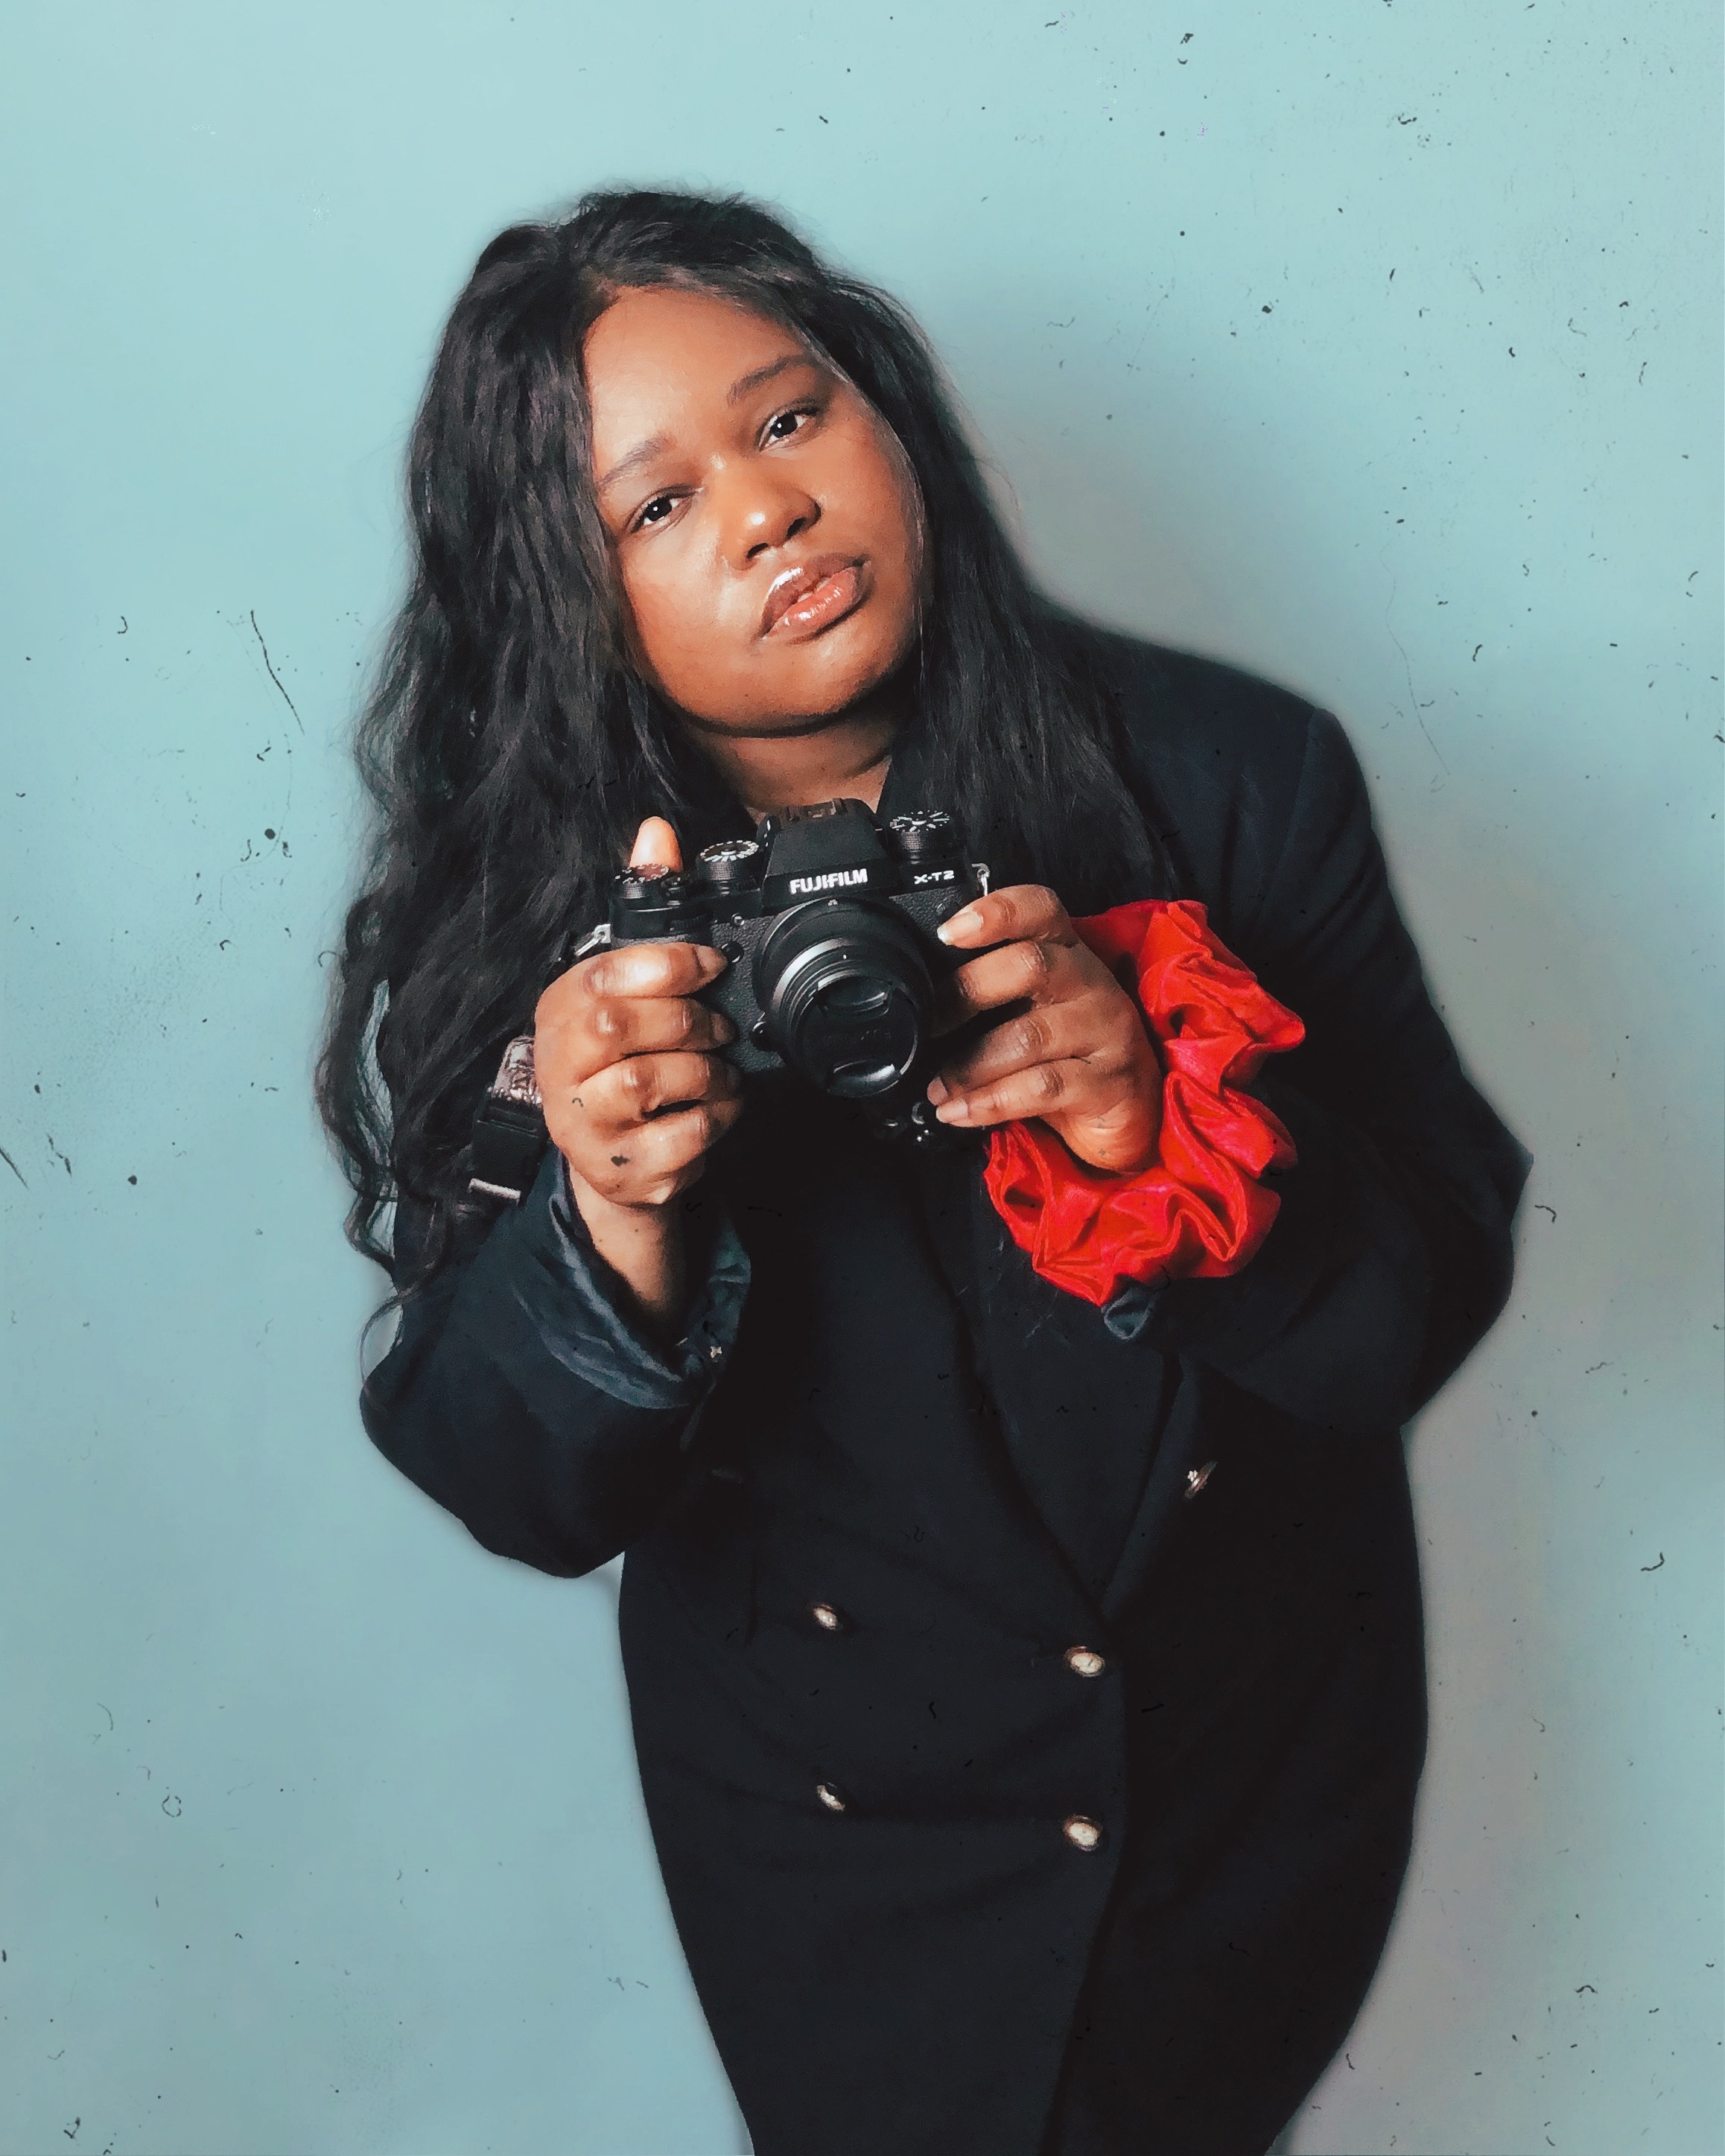 Jacquelyn is a black woman with long black hair. She is holding a digital camera and wearing a red scrunchie.
